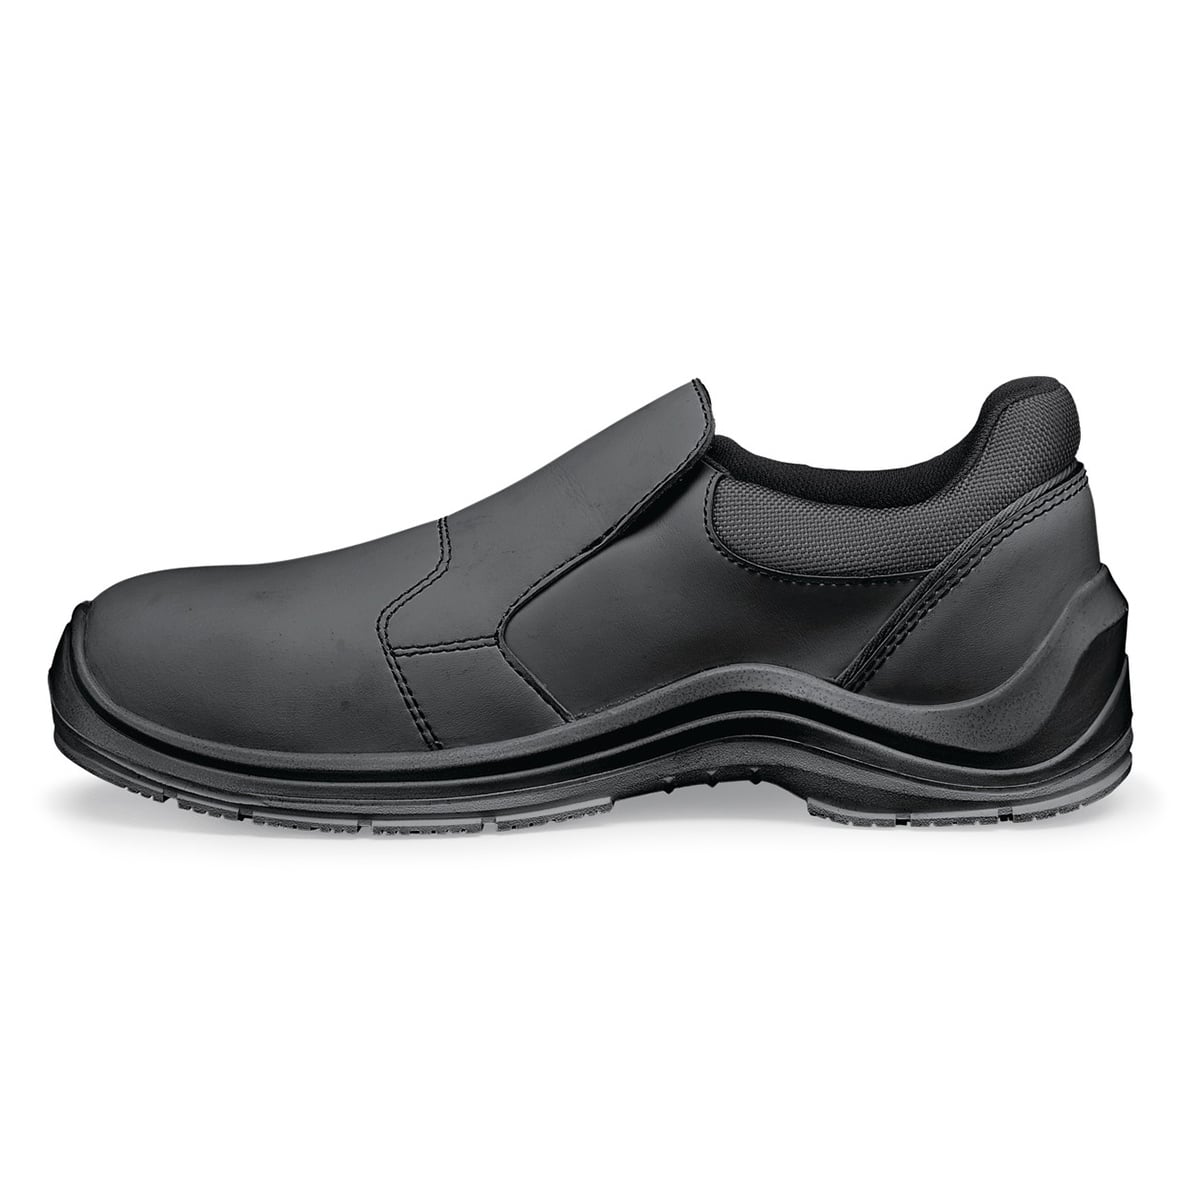 The Dolce81 from Shoes For Crews is a slip-resistant shoe with a waterproof, puncture-resistant upper and a steel toe cap, seen from the left.